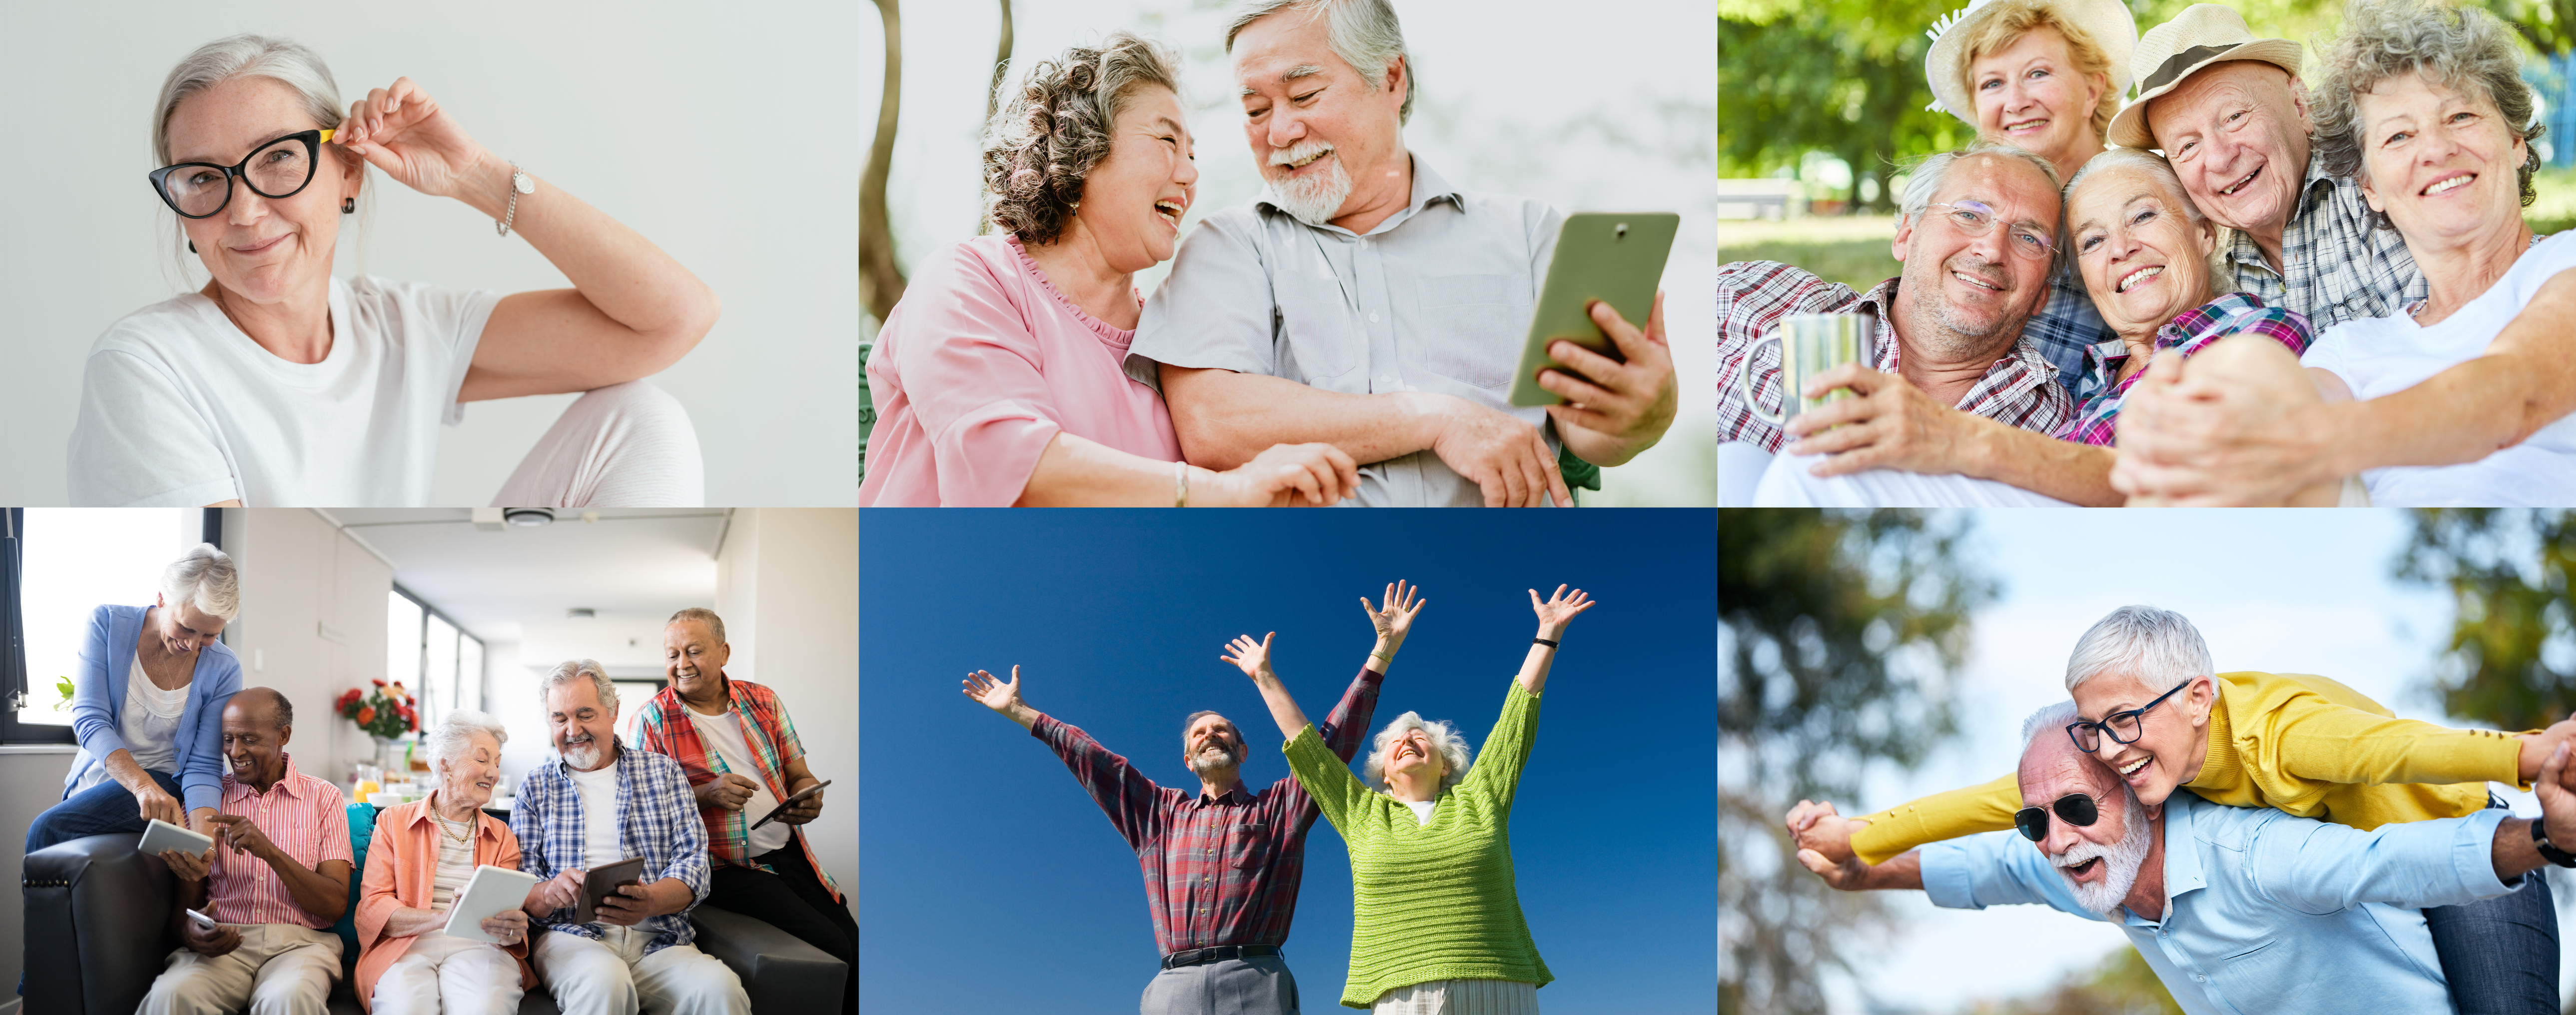 Collage of photos featuring older adults living happy active lives